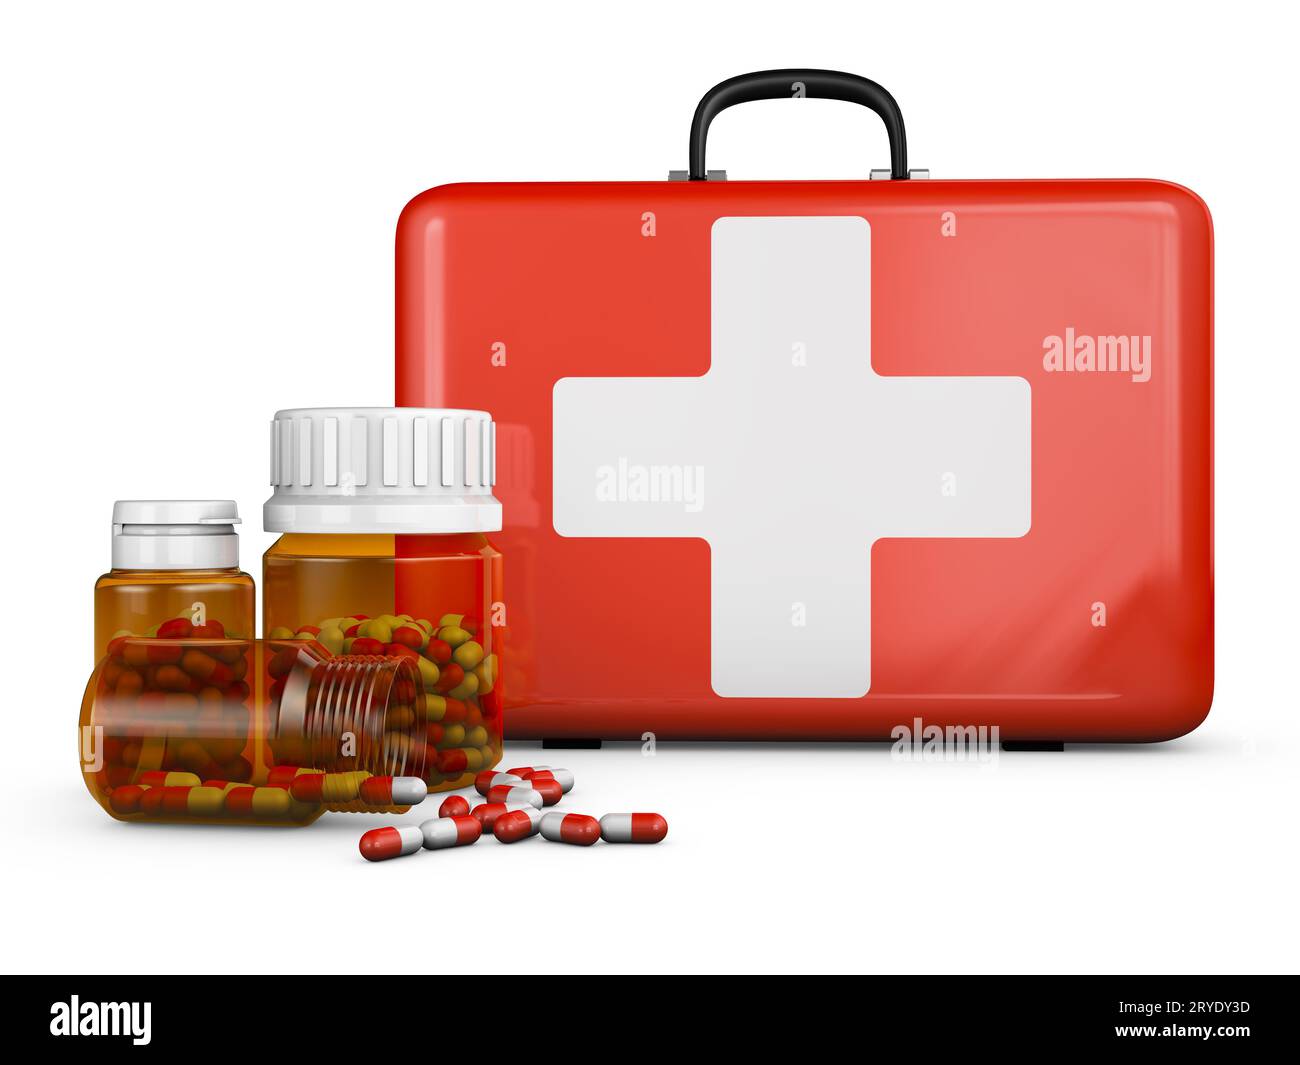 Paramedic suitcase Cut Out Stock Images & Pictures - Alamy